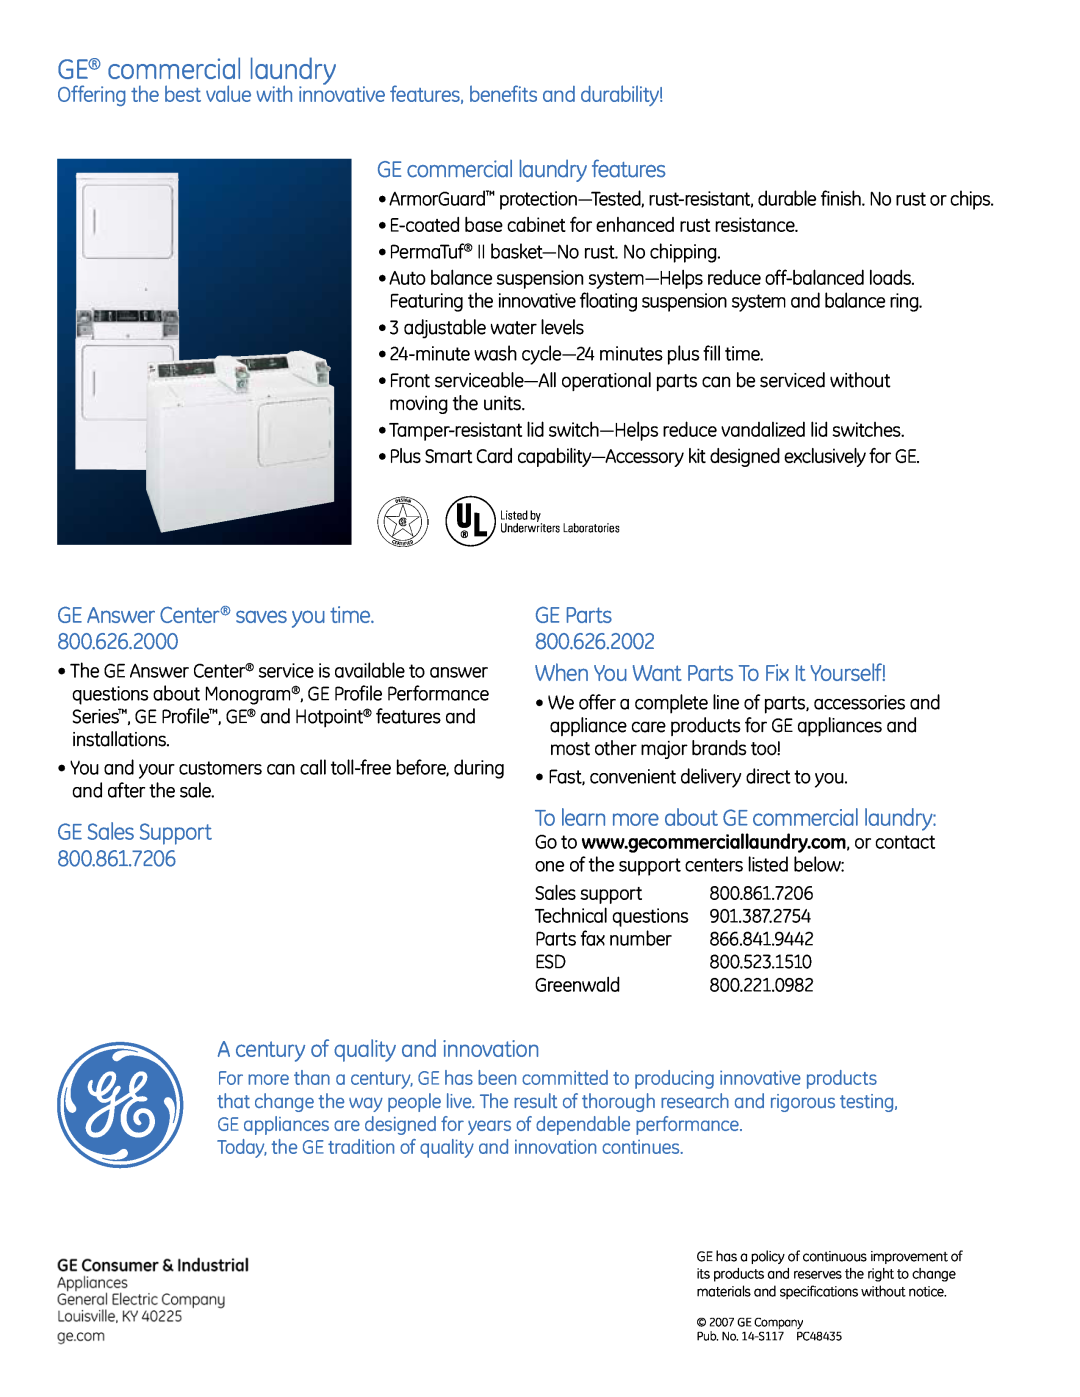 GE commercial washer GE commercial laundry features, GE Answer Center saves you time, GE Sales Support, 800.861.7206 